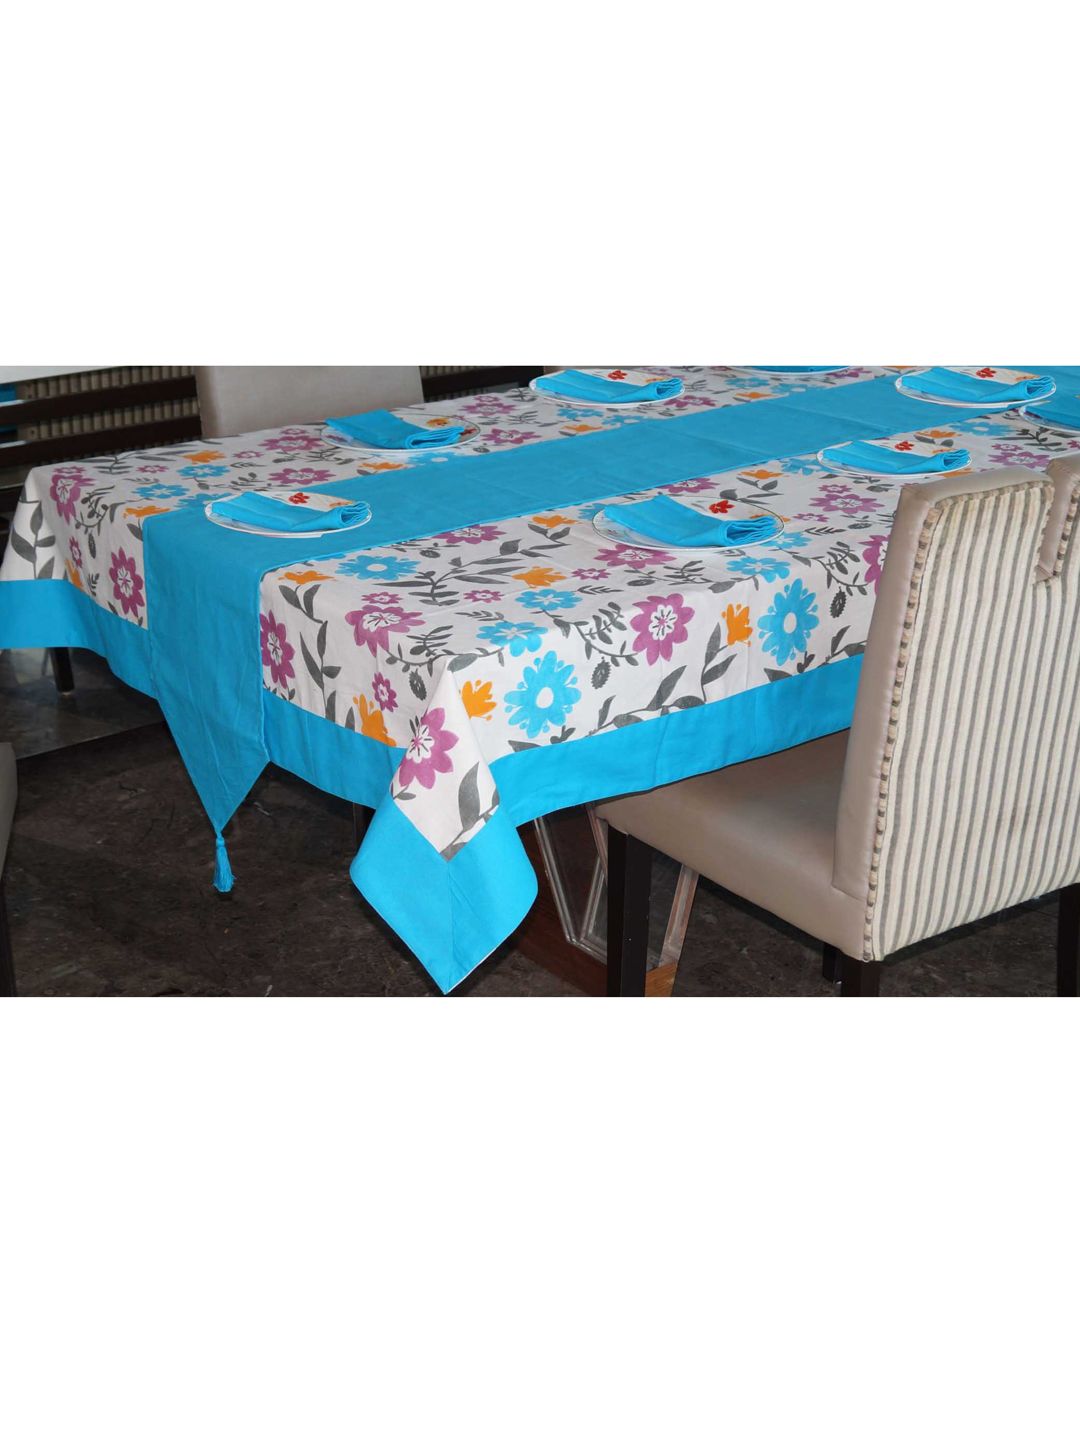 Lushomes Set Of 10 Blue & White Floral Printed Cotton 8-Seater Table Linen Set Price in India